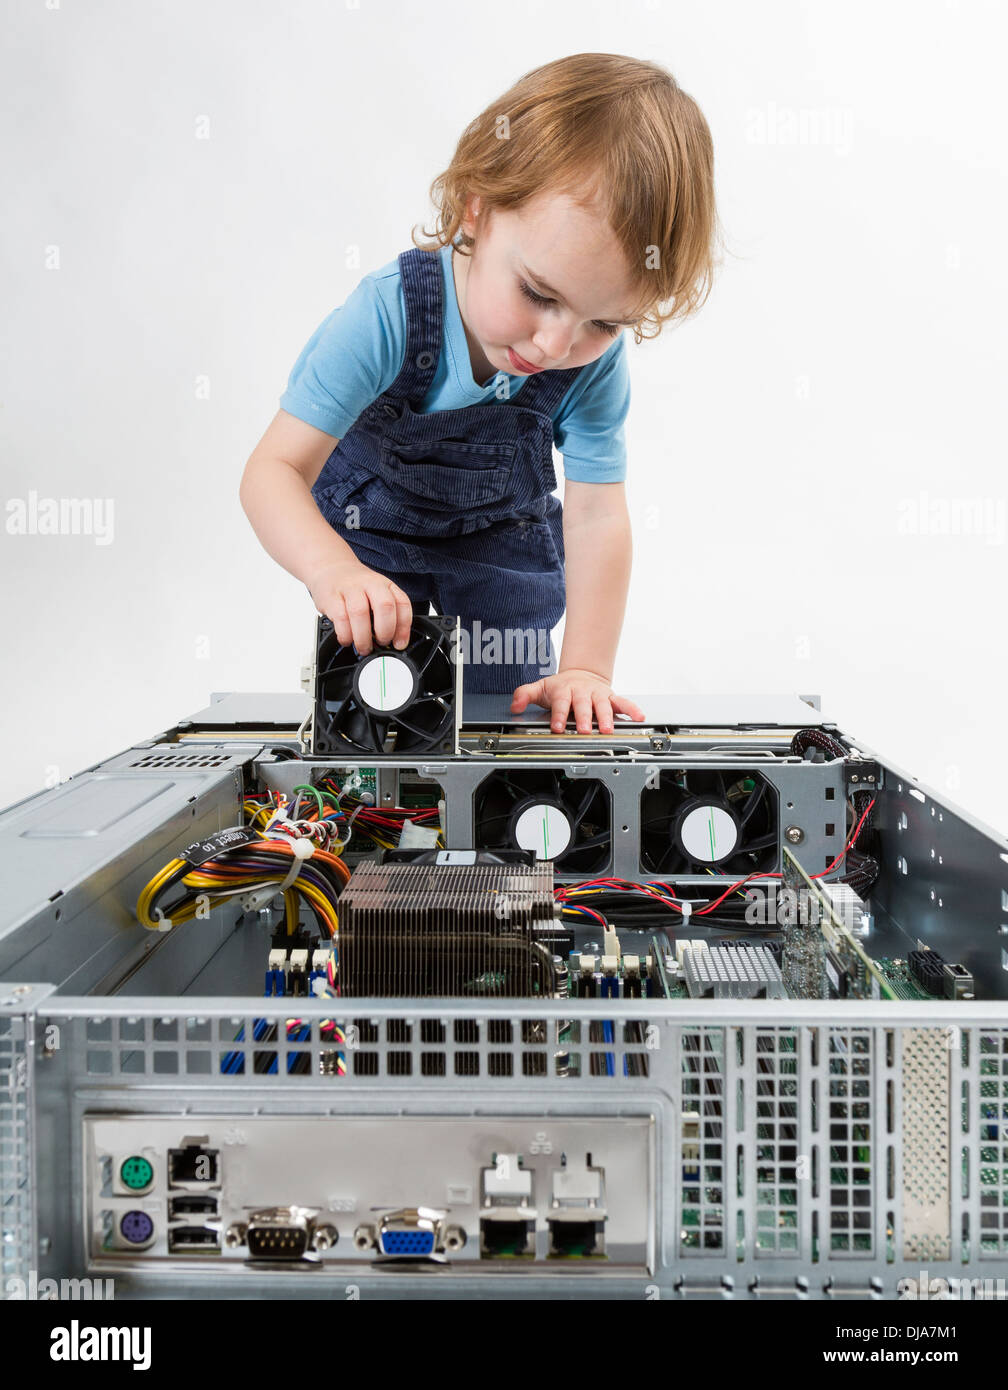 cute child with open network server. studio shot in light grey background Stock Photo